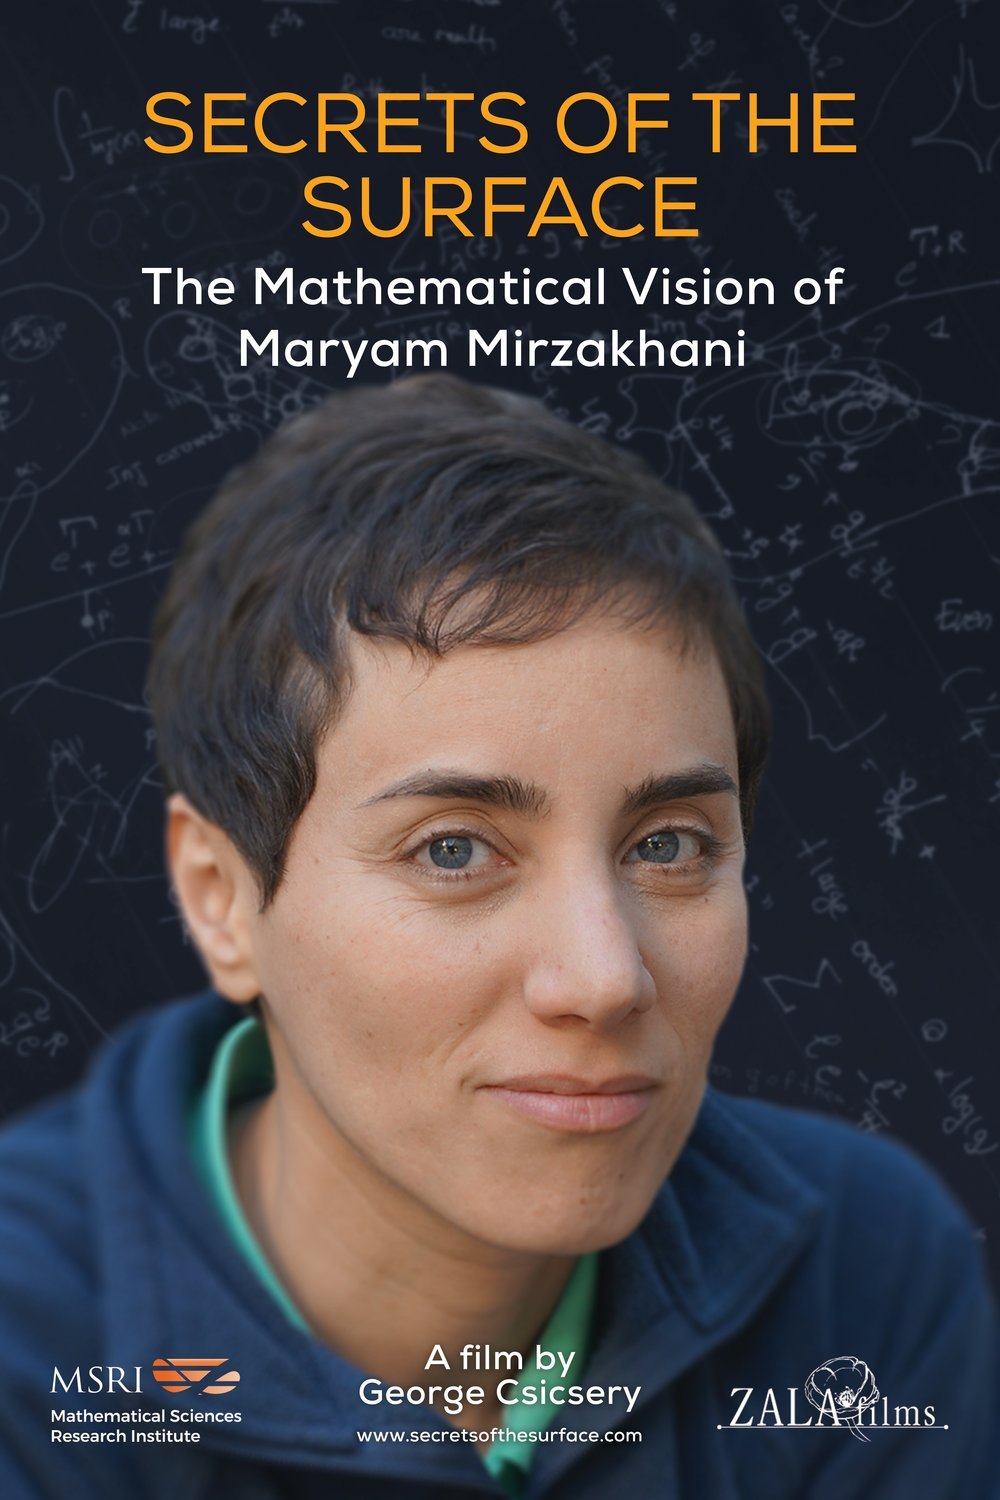 L'affiche du film Secrets of the Surface: The Mathematical Vision of Maryam Mirzakhani